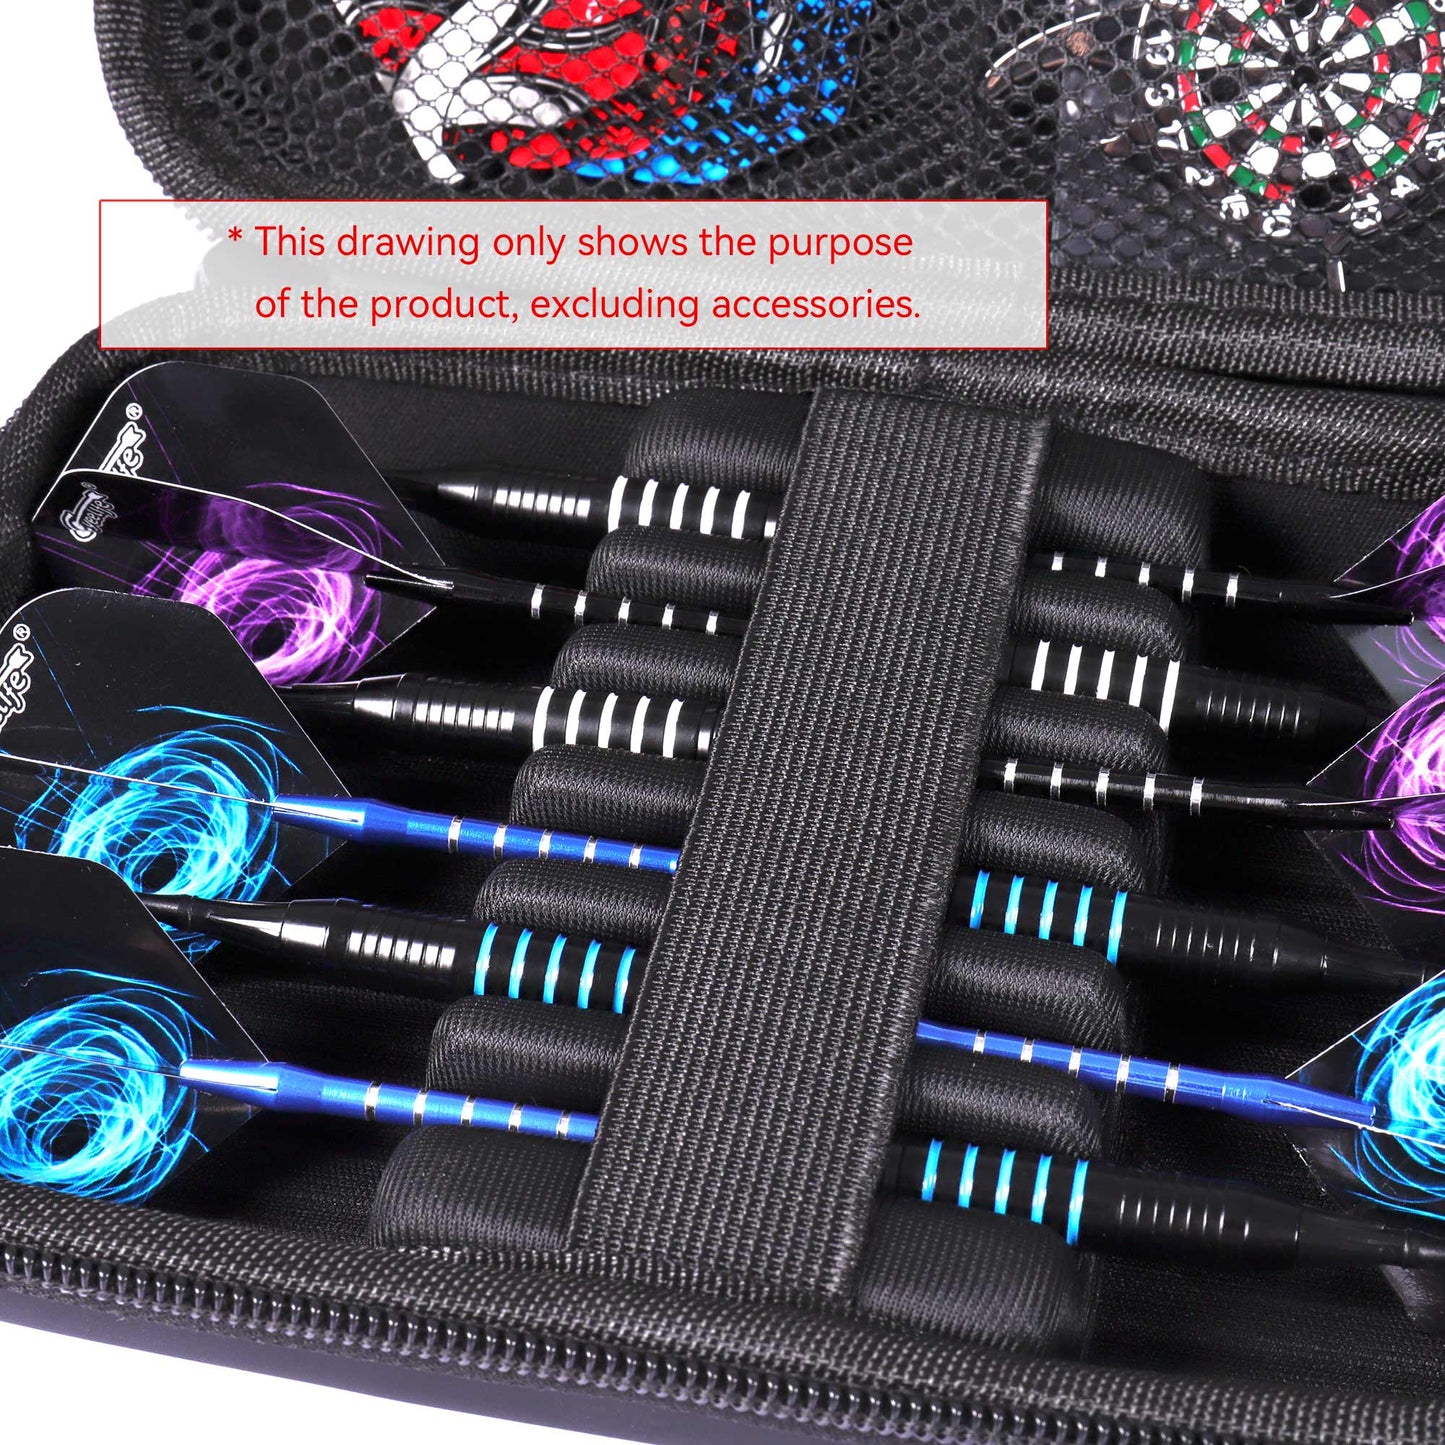 ZX03B PU Dart Carry case For 6 Darts(Only case),black/blue